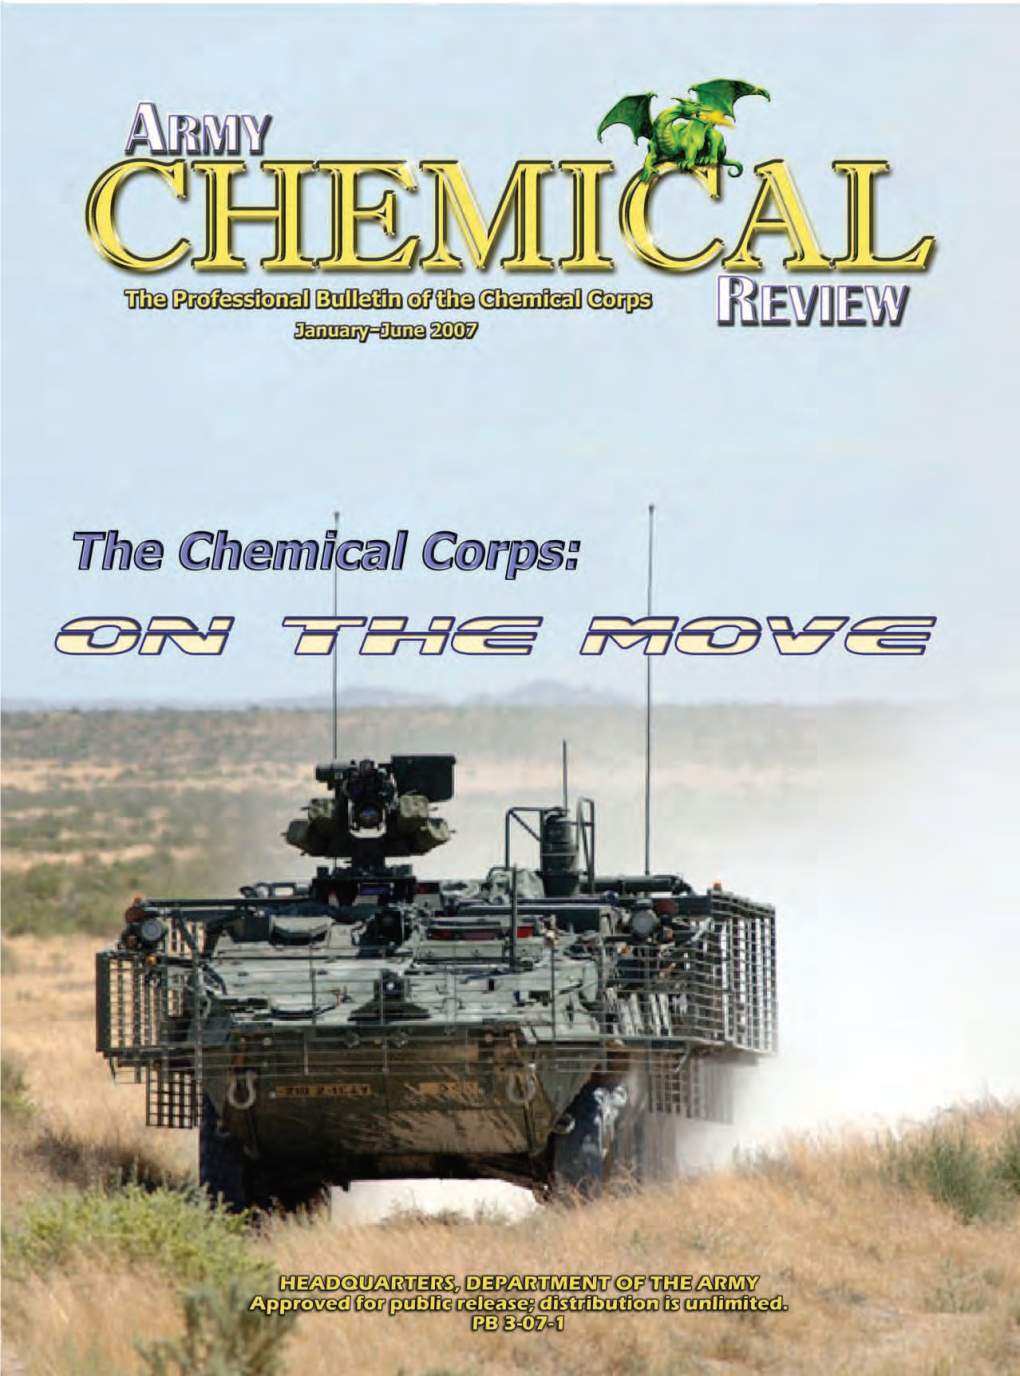 The Ever-Evolving Chemical Corps As I Begin This Article, I Reflect Back on My Initial Experience in This Great Army Branch⎯The Chemical Corps